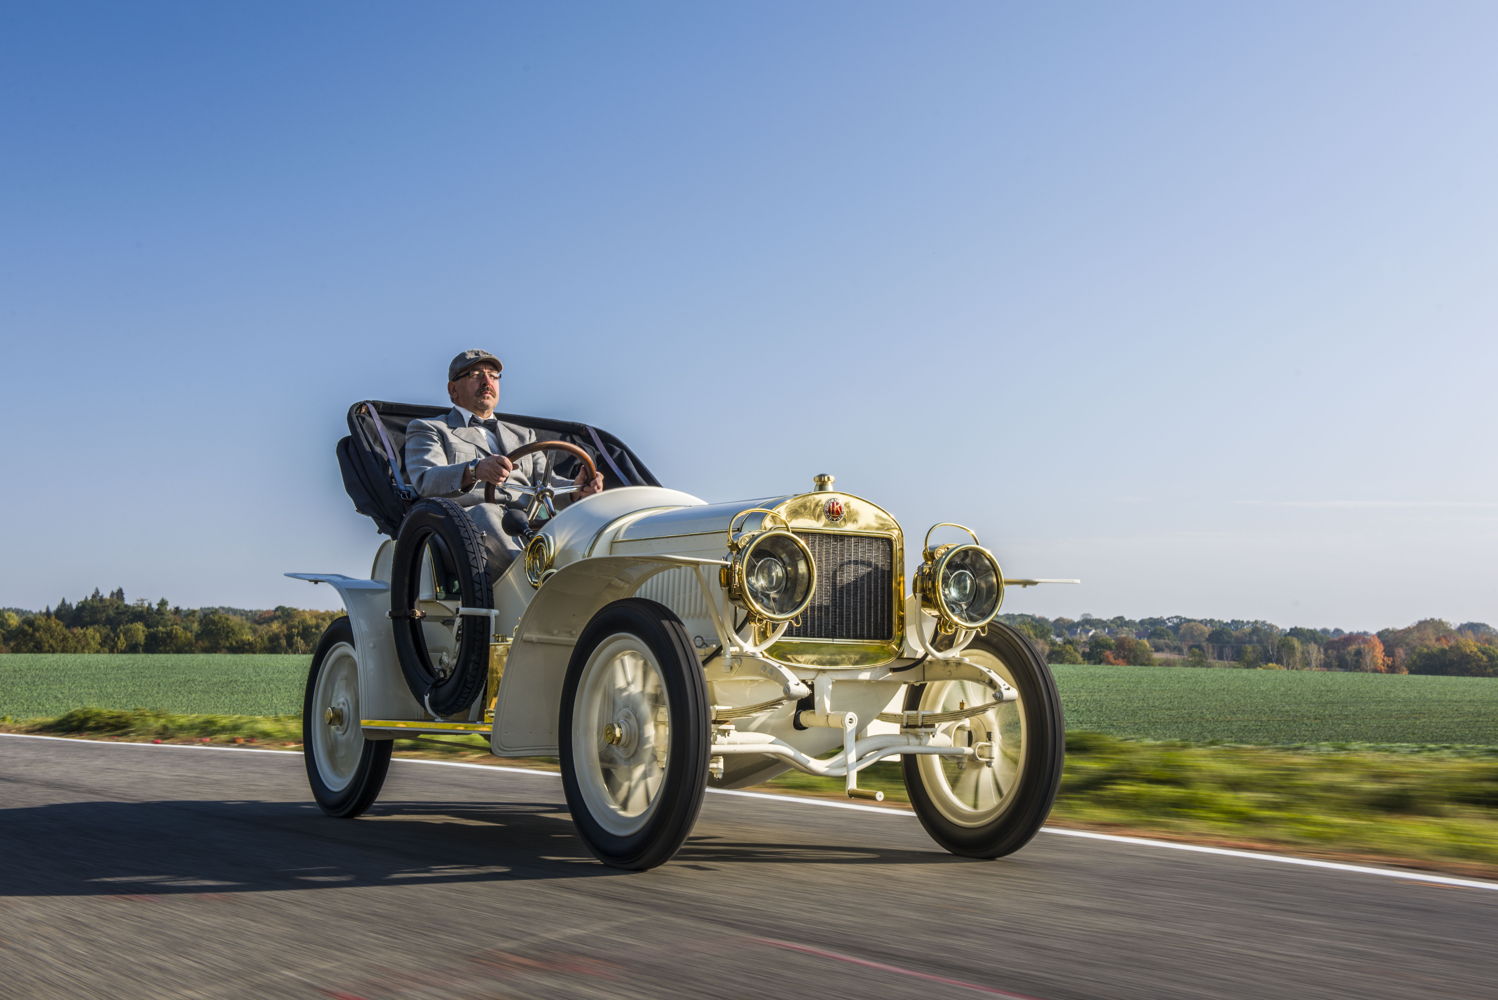 The sports car Laurin & Klement BSC, built in 1908, is the only surviving example of just twelve of this type ever built. It has been fully restored and today is a magnet for visitors to the ŠKODA Museum.